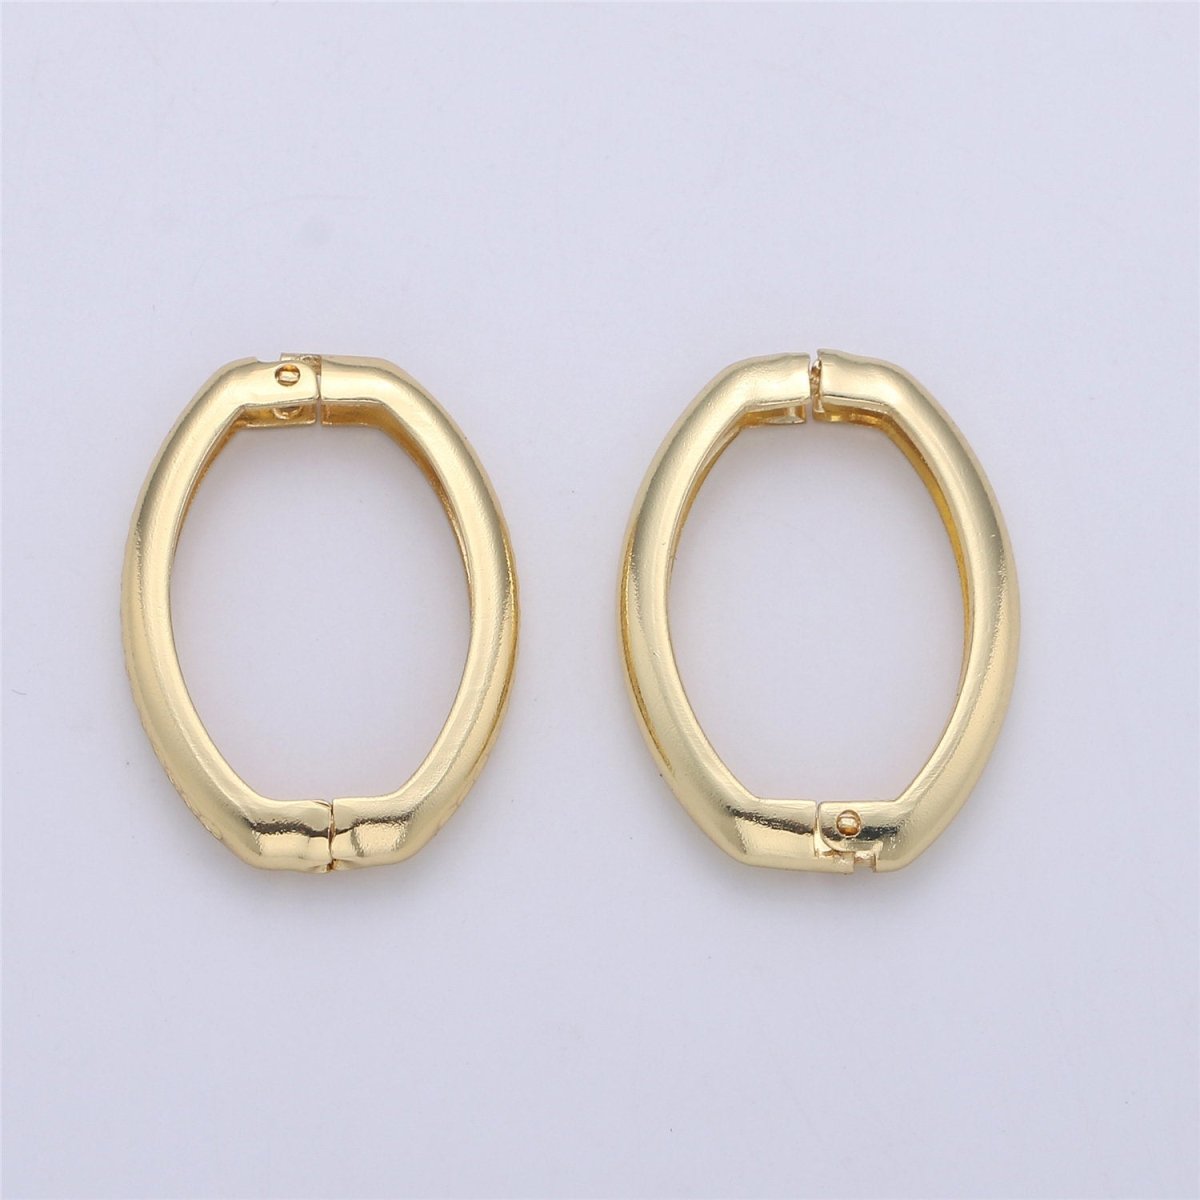 Gold Necklace Clasp, Oval Spring Gate Ring , Oval Gate Ring , Basic Supplies 24k Gold Filled Clasp for Necklace Supply K-392 - DLUXCA